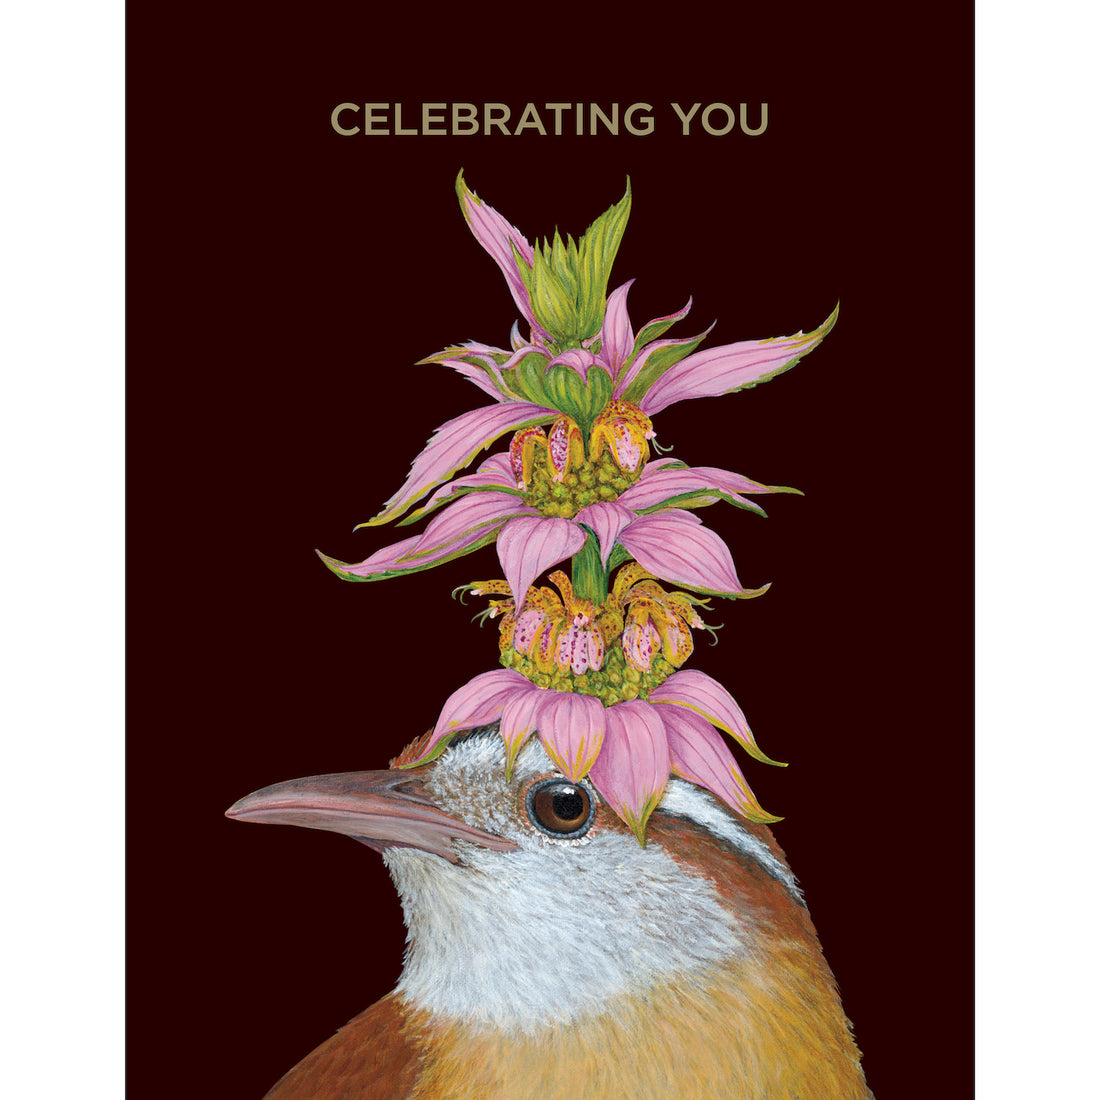 A whimsical painting of a bird with flowers on its head by Hester &amp; Cook&